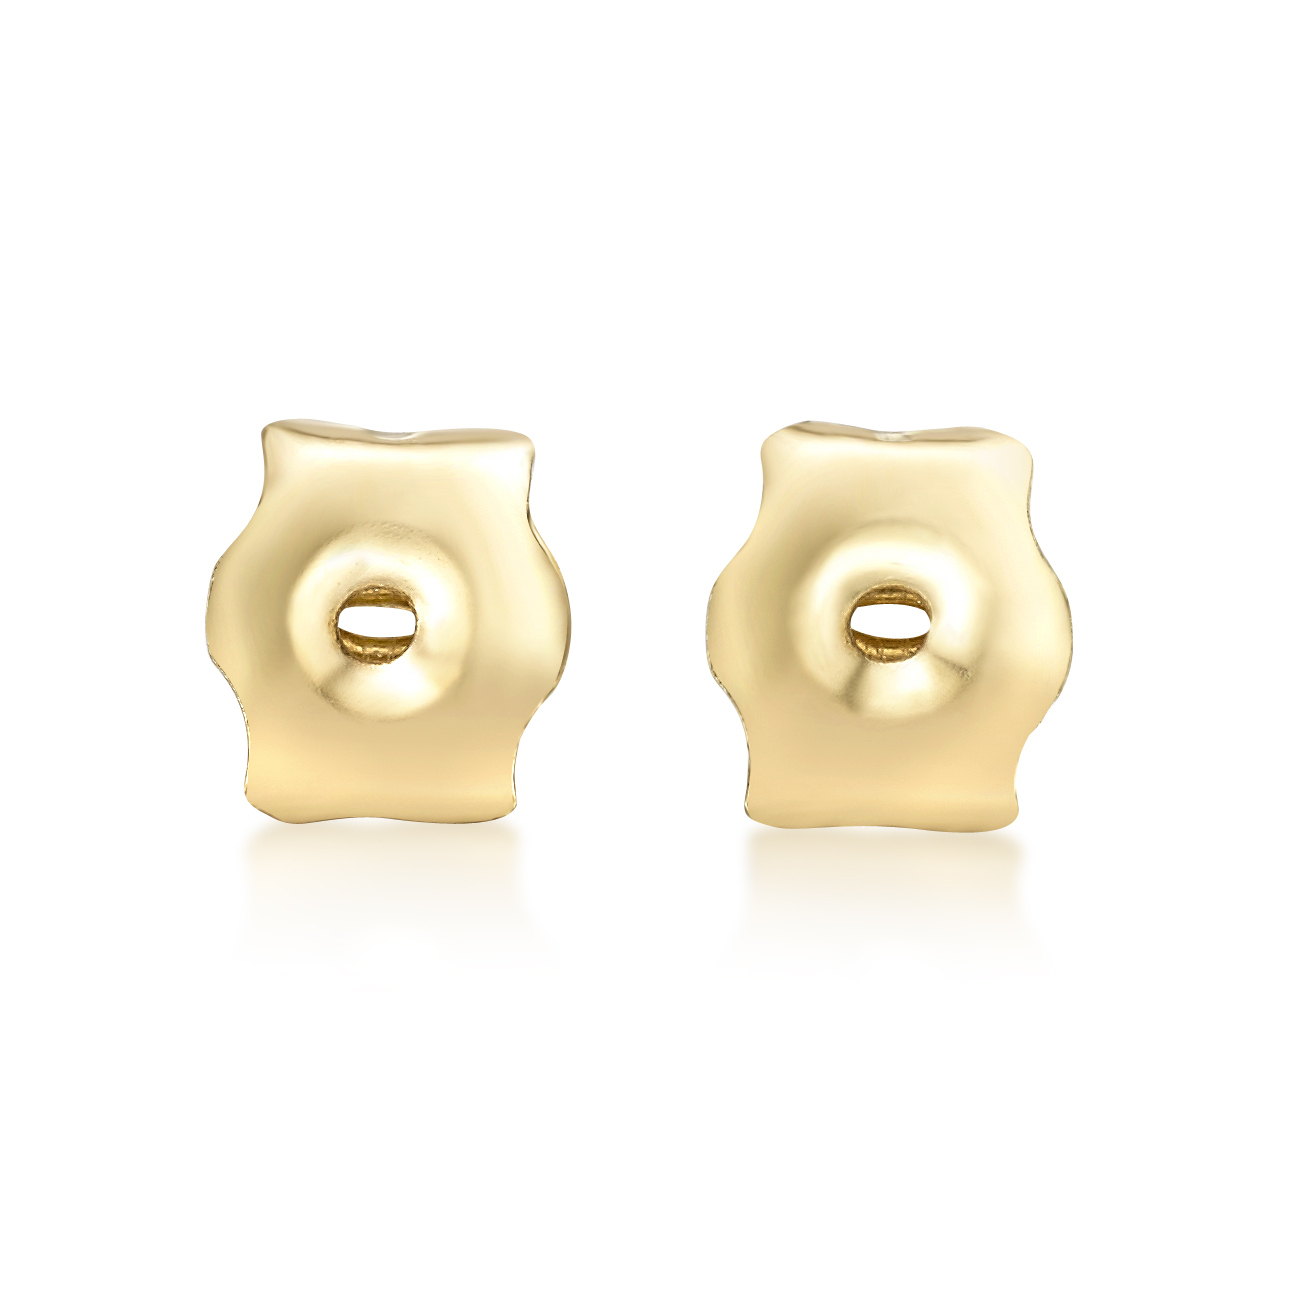 49839-earring-backs-replacement-parts-yellow-gold-.jpg